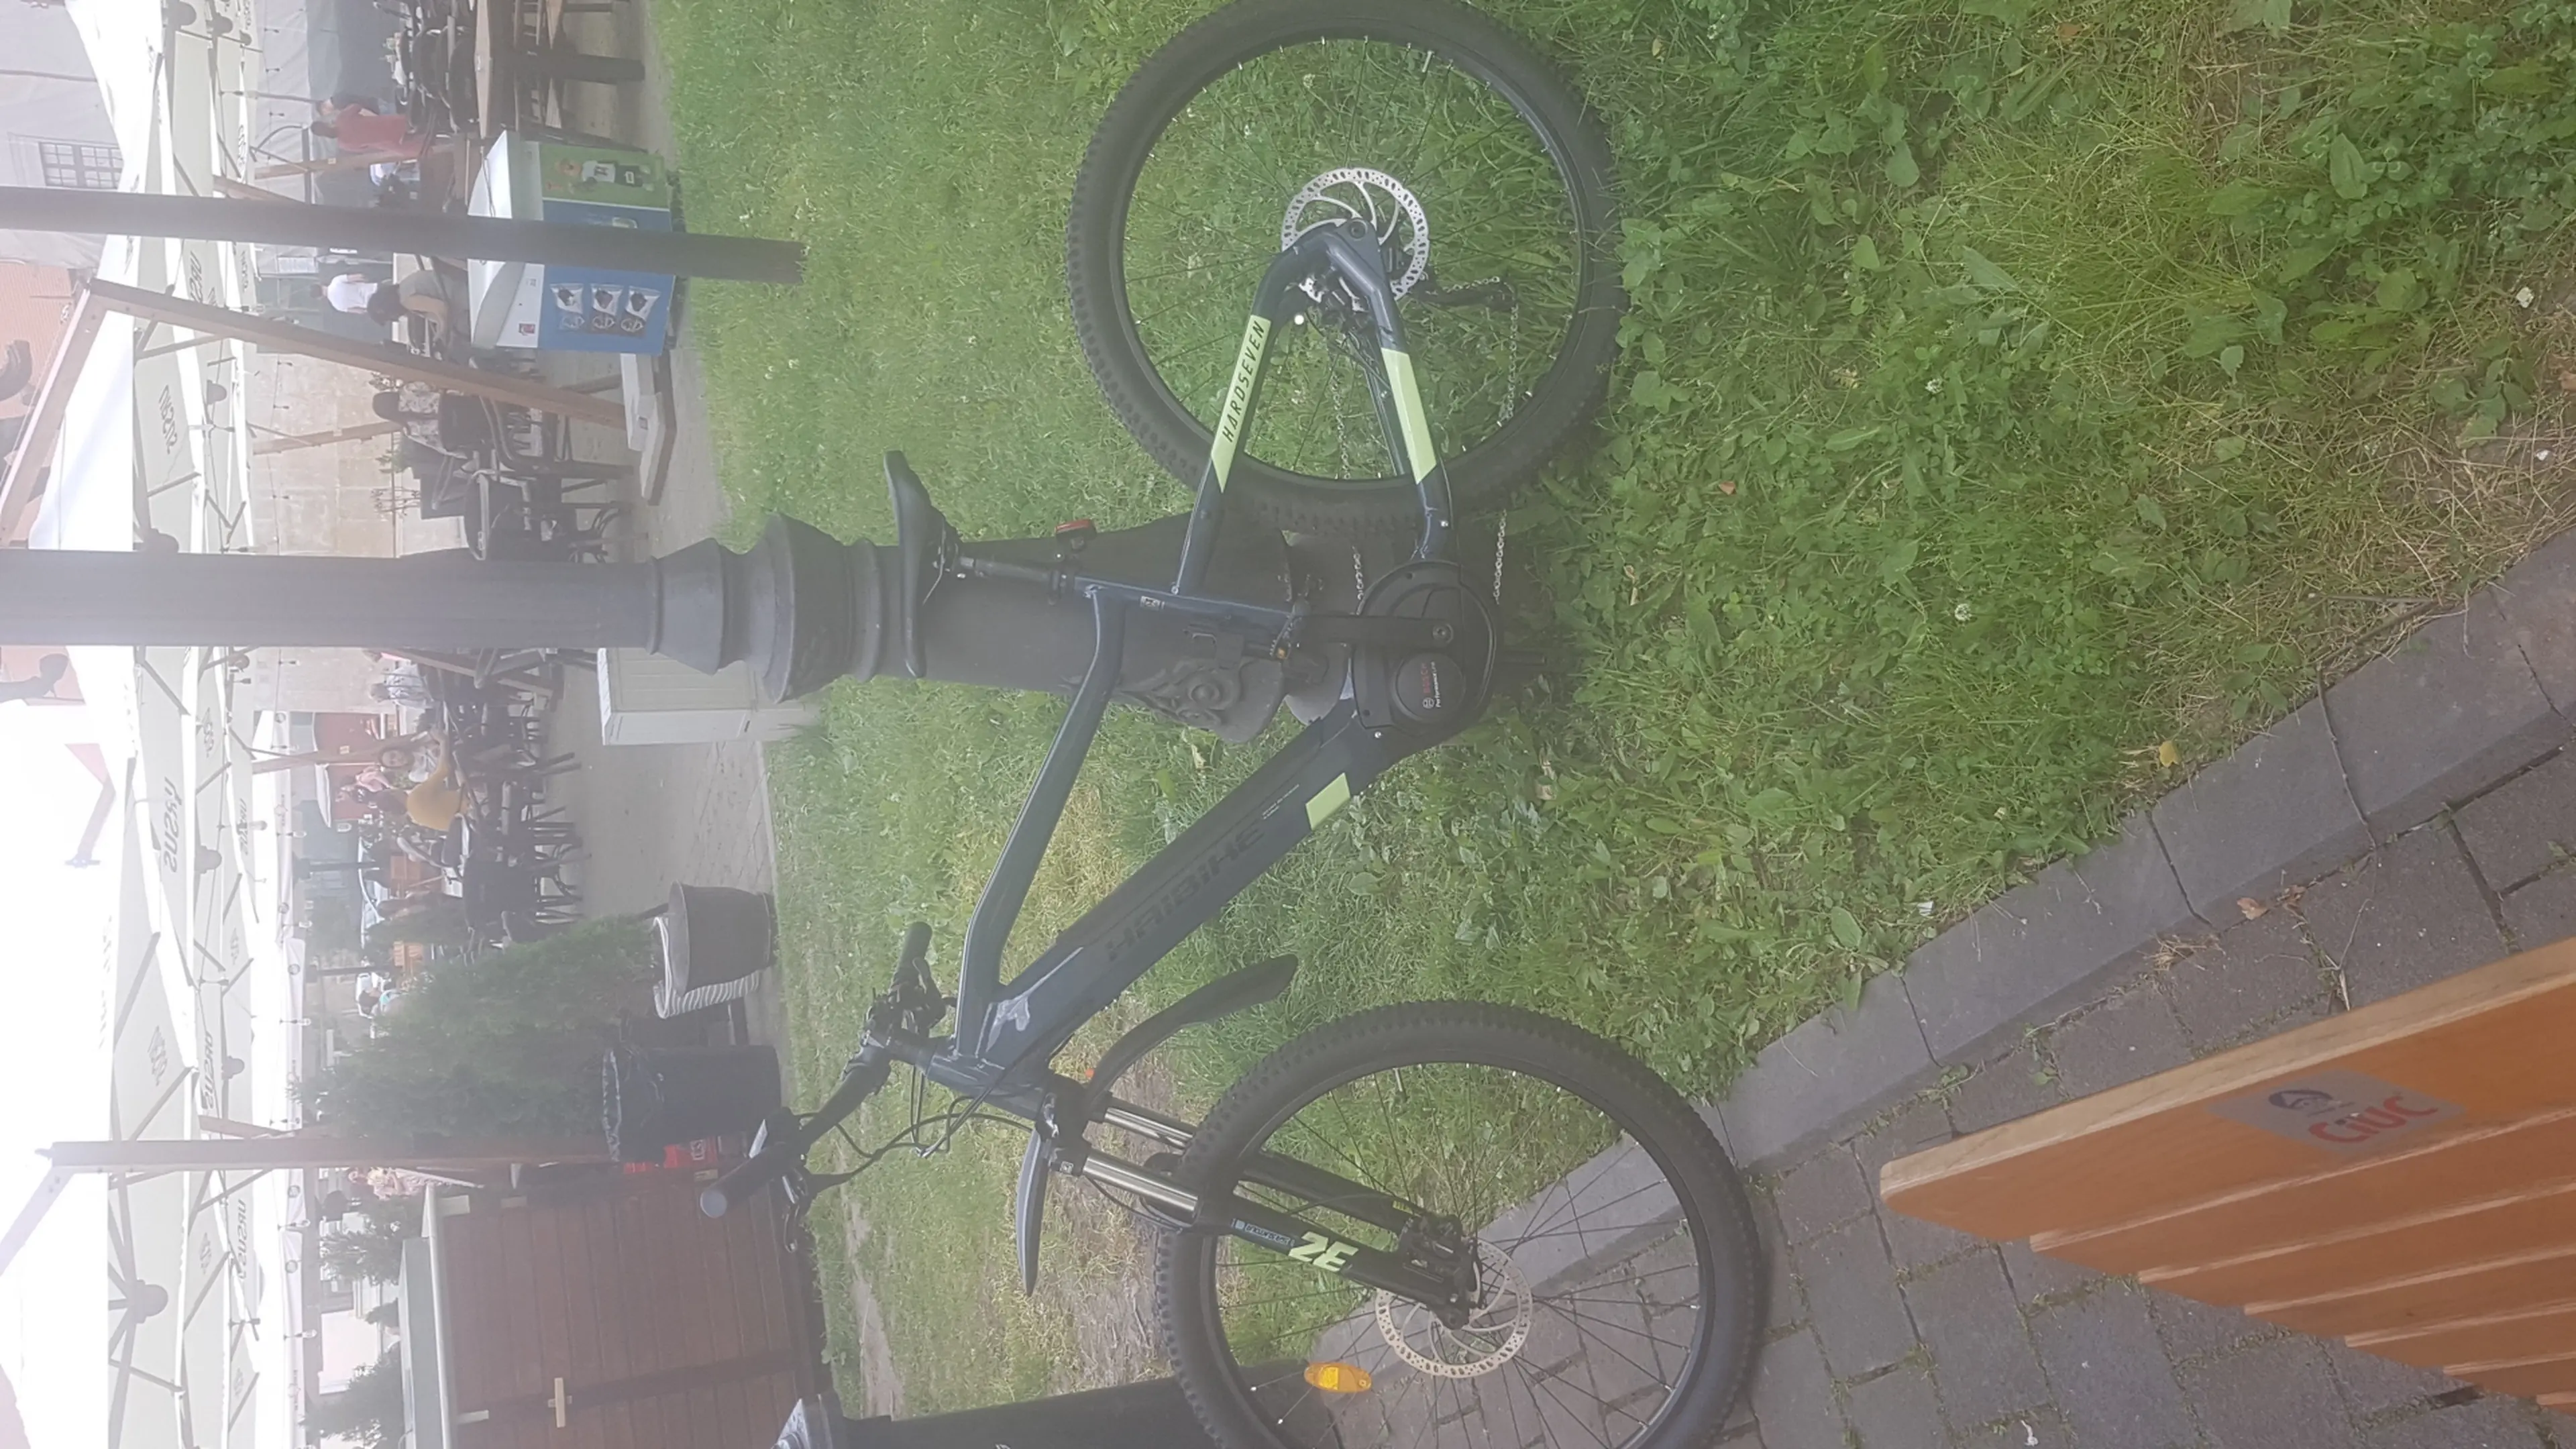 2. Haibike Hardseven electric